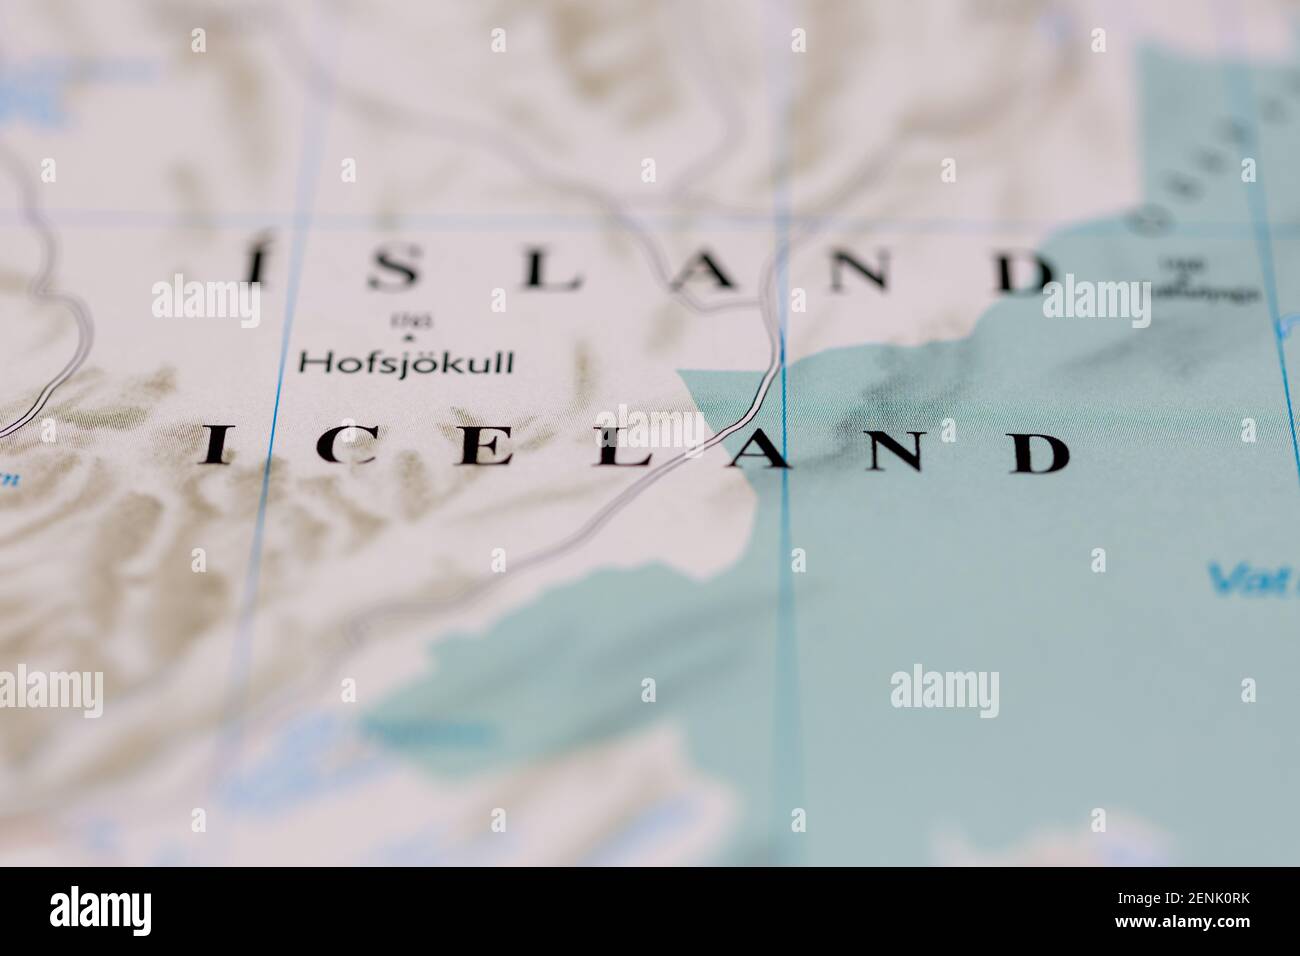 Iceland shown on a Road map or a geography map Stock Photo